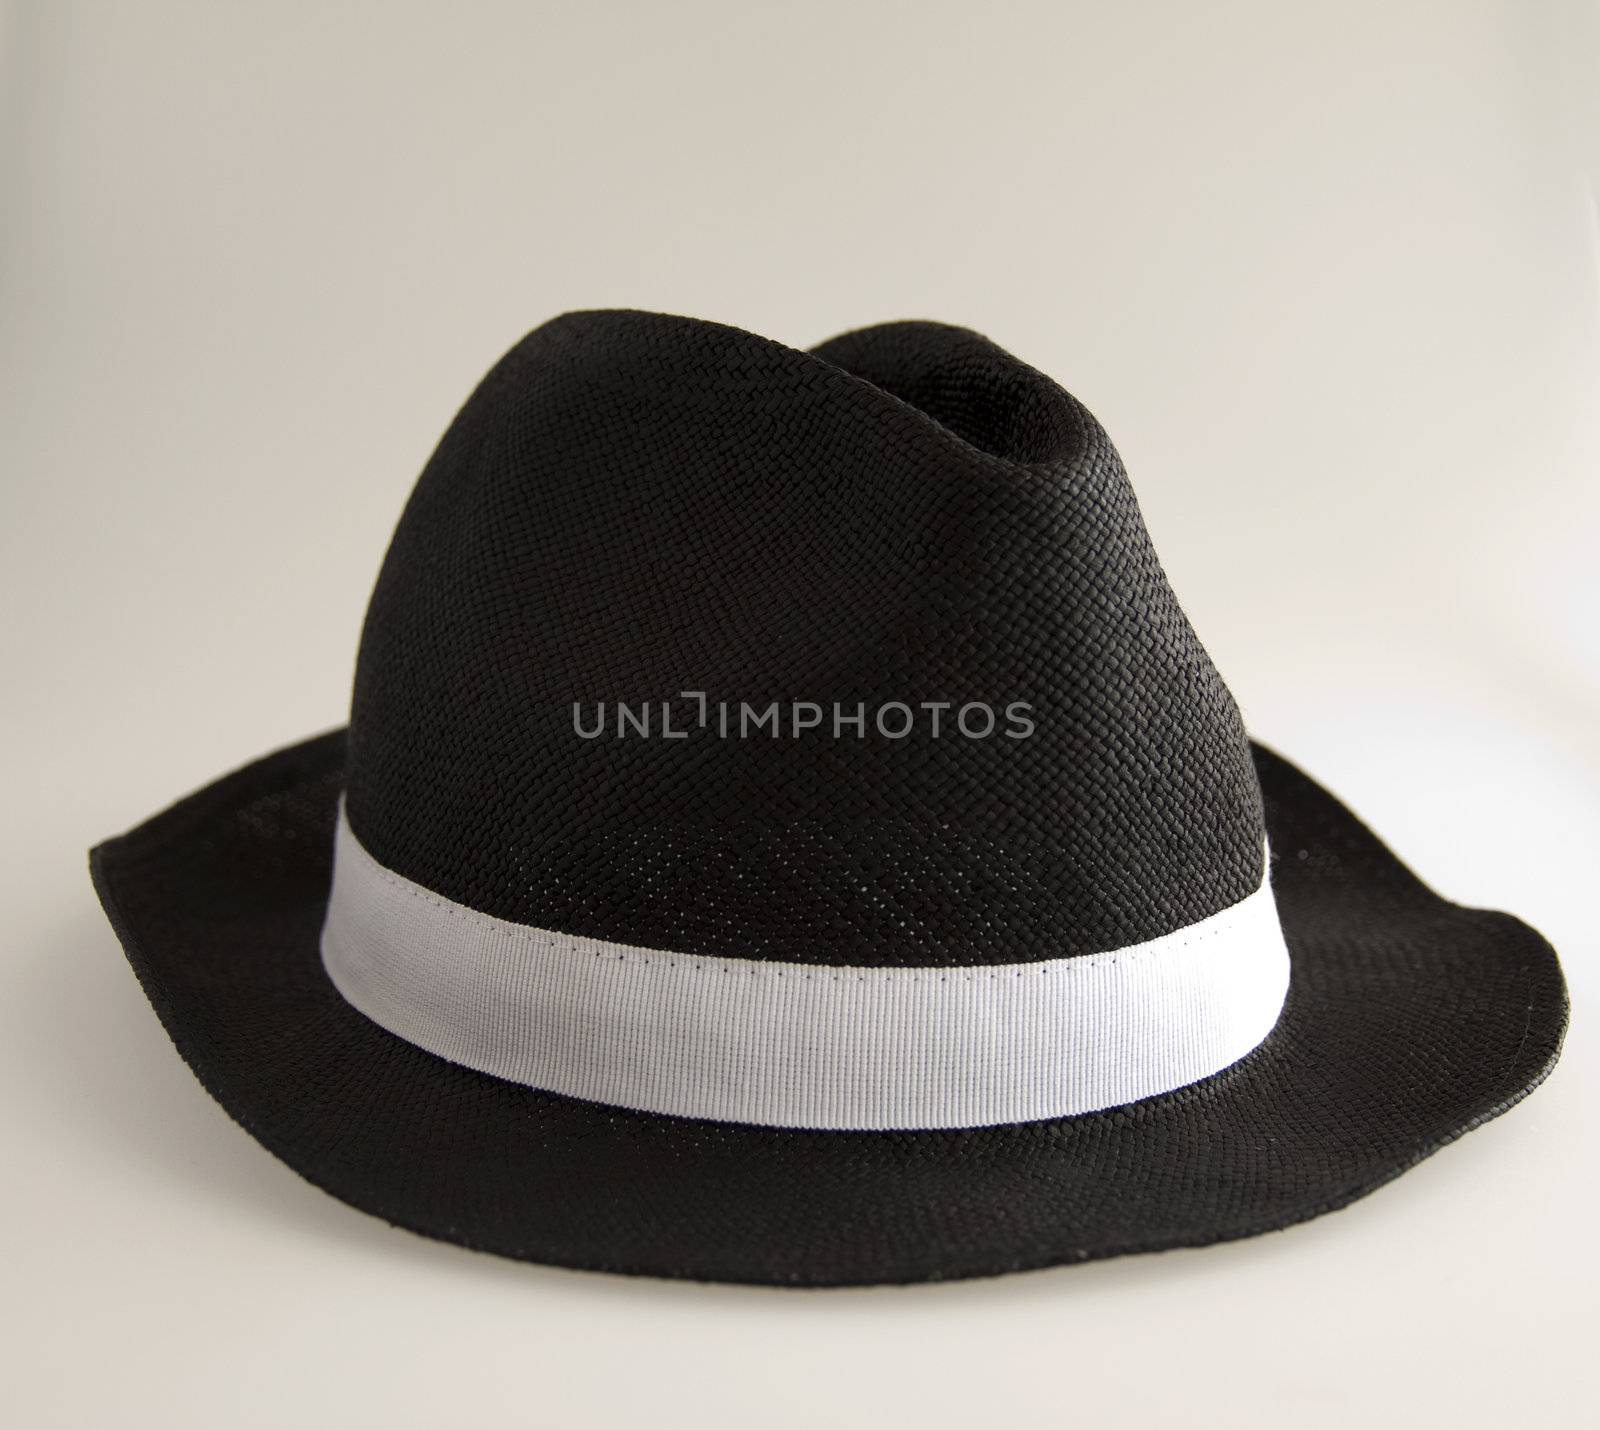 Black and white man's hat on white background